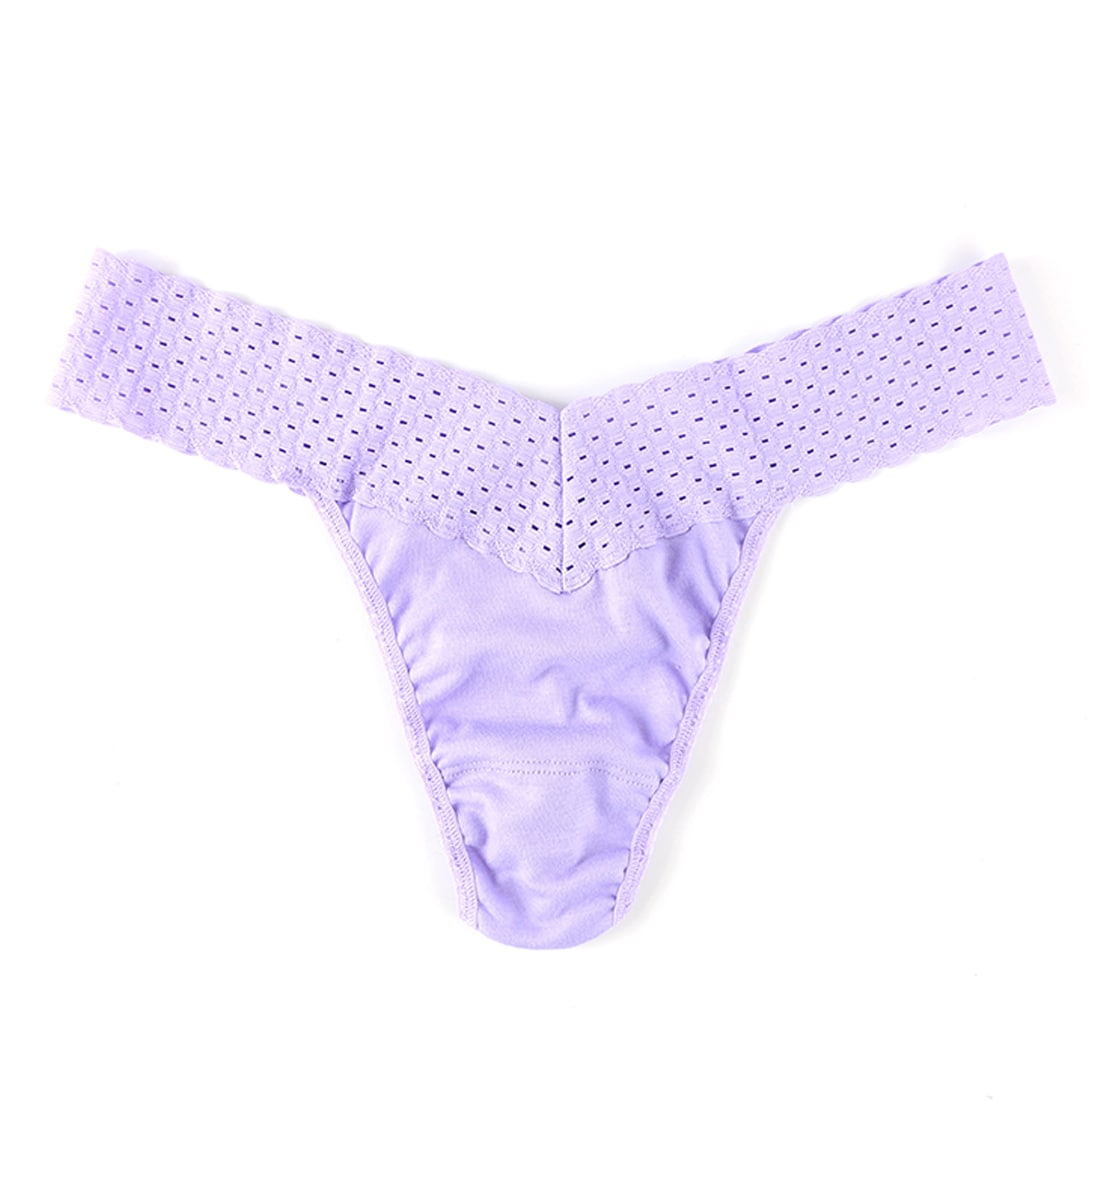 Hanky Panky Organic Cotton Original Rise Thong with Lace (791101),Wisteria - Wisteria,One Size